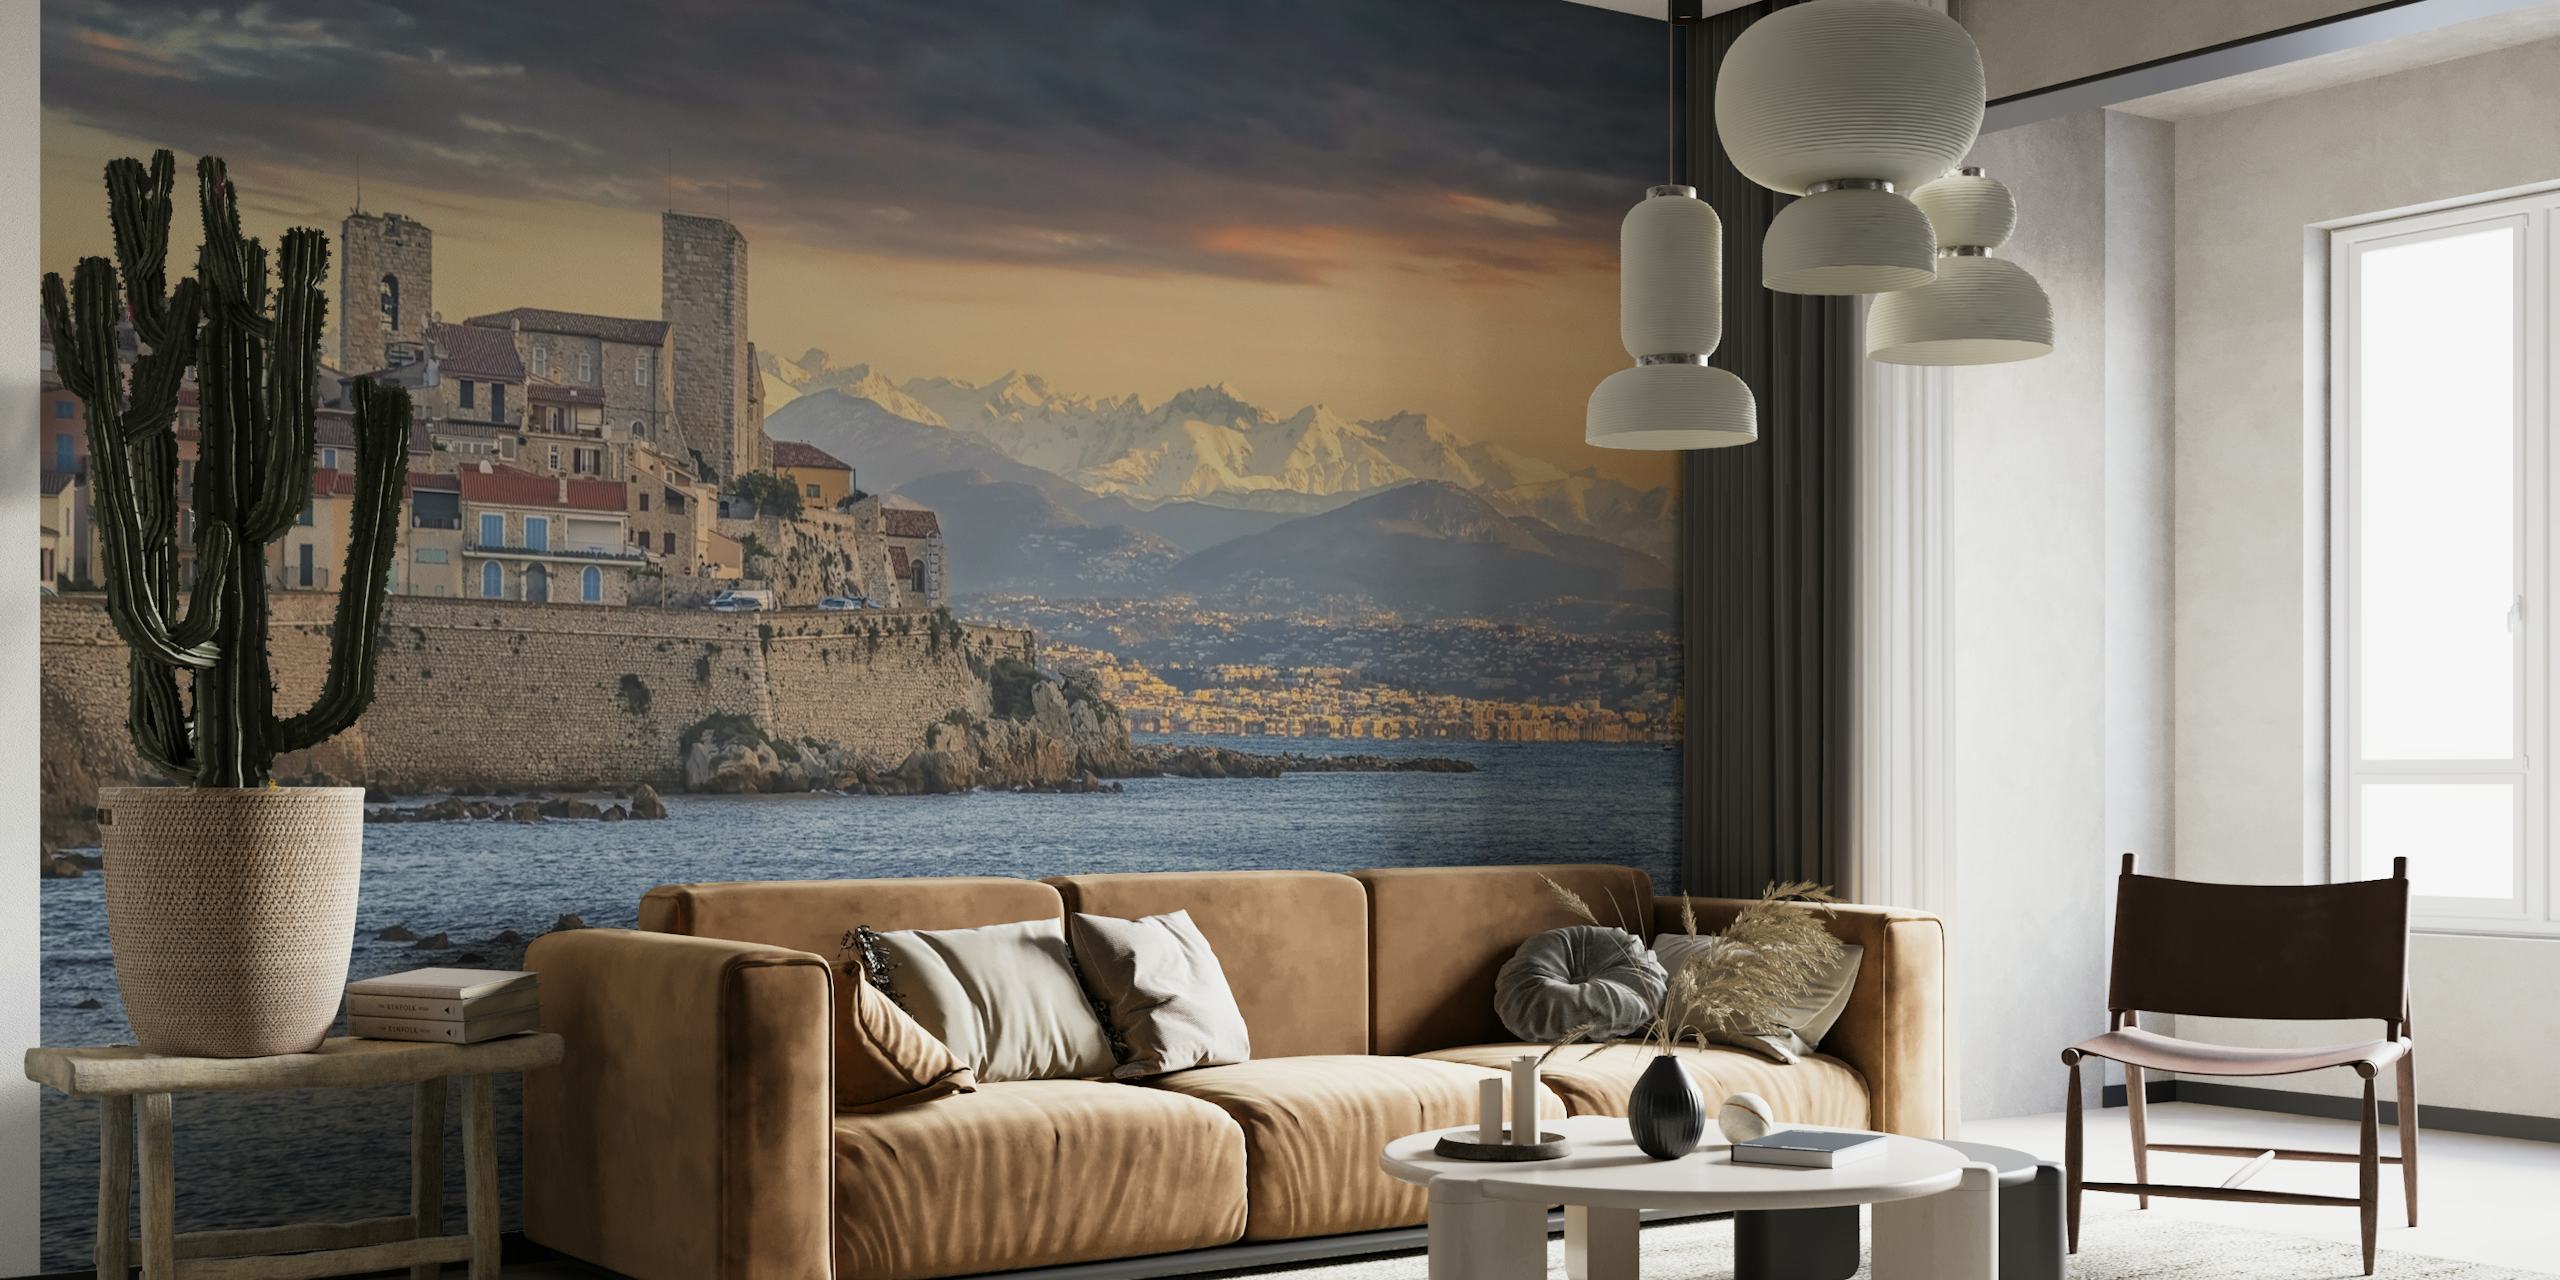 Antibes coastal town wall mural with historic buildings and calm sea at dusk